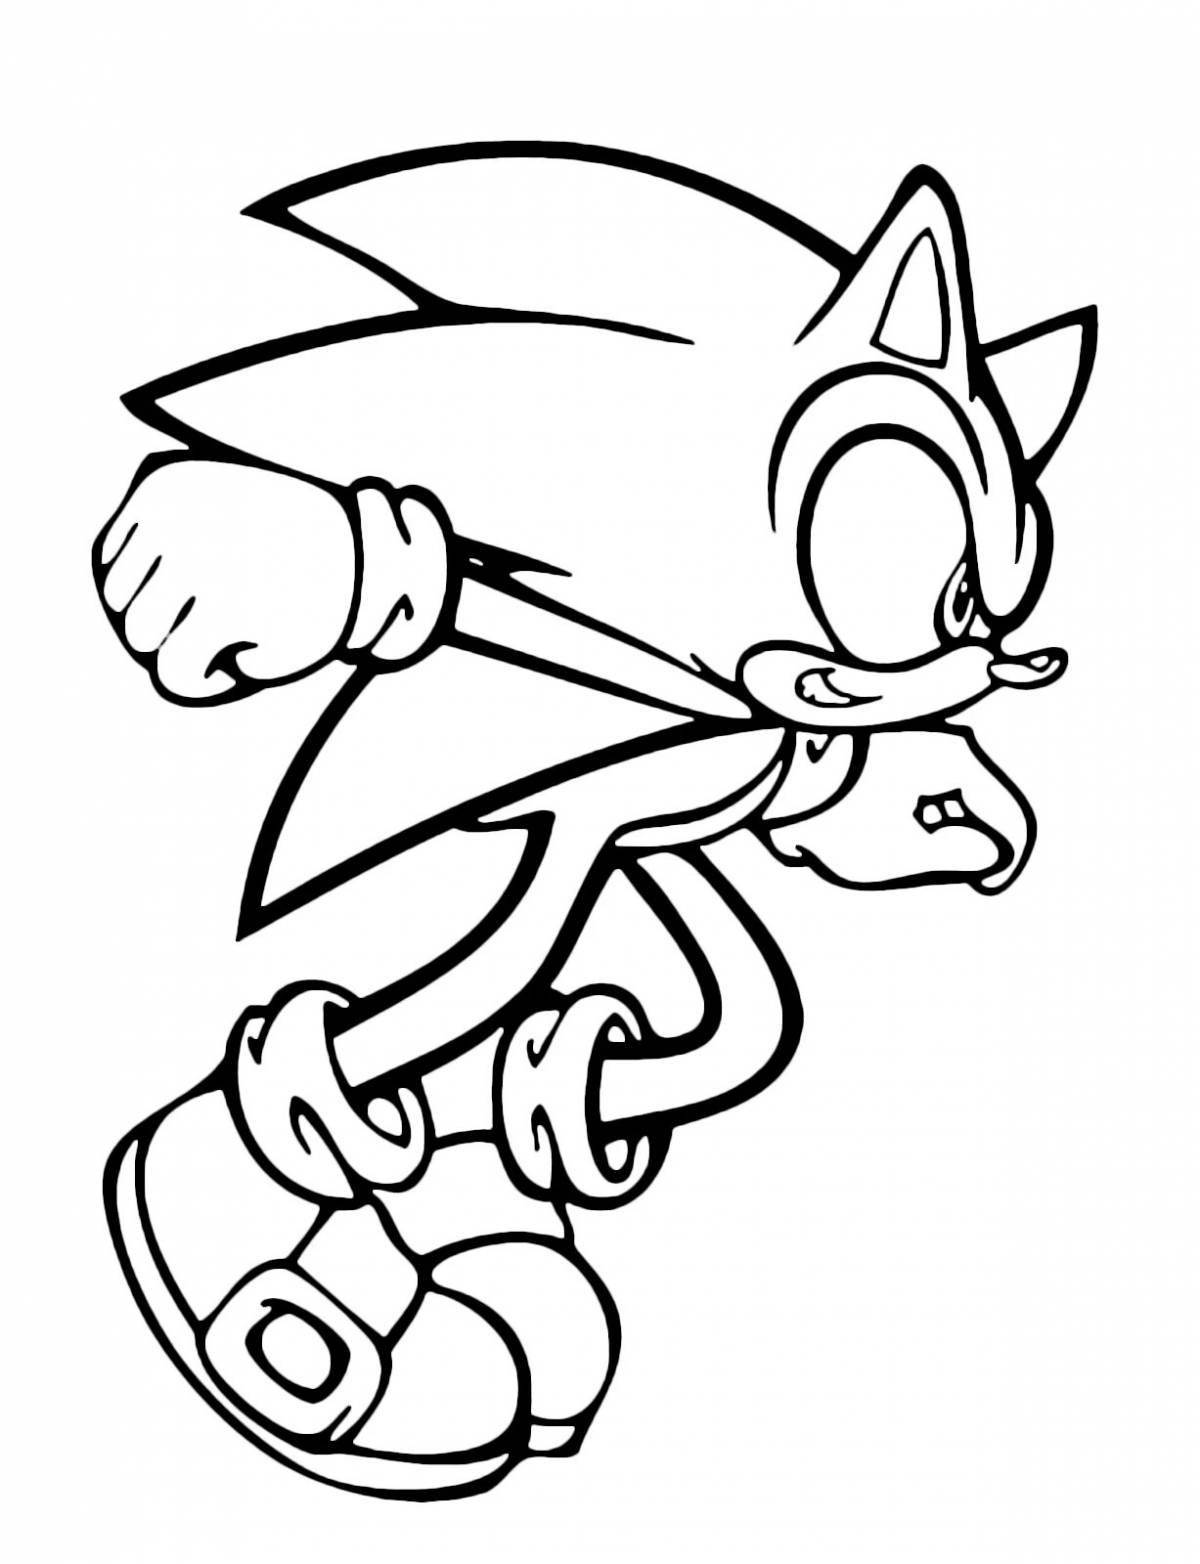 Animated sonic game coloring book